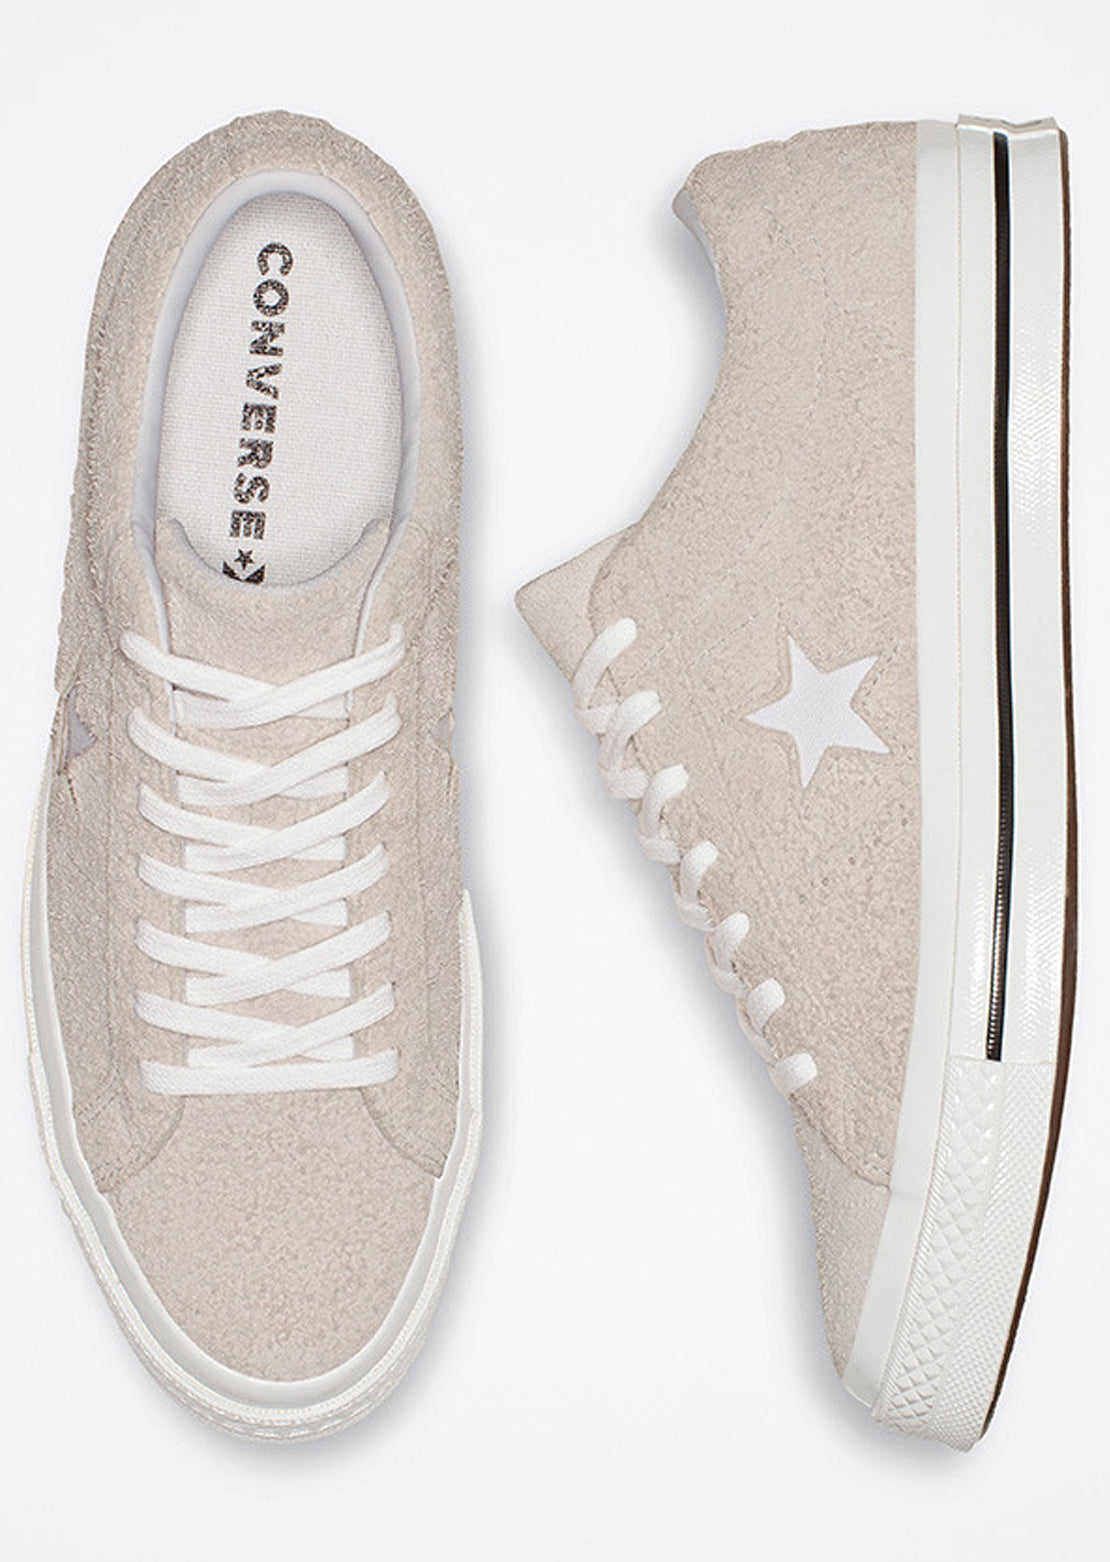 Converse Men’s One Star Low Top Suede OX Shoes White/White/White